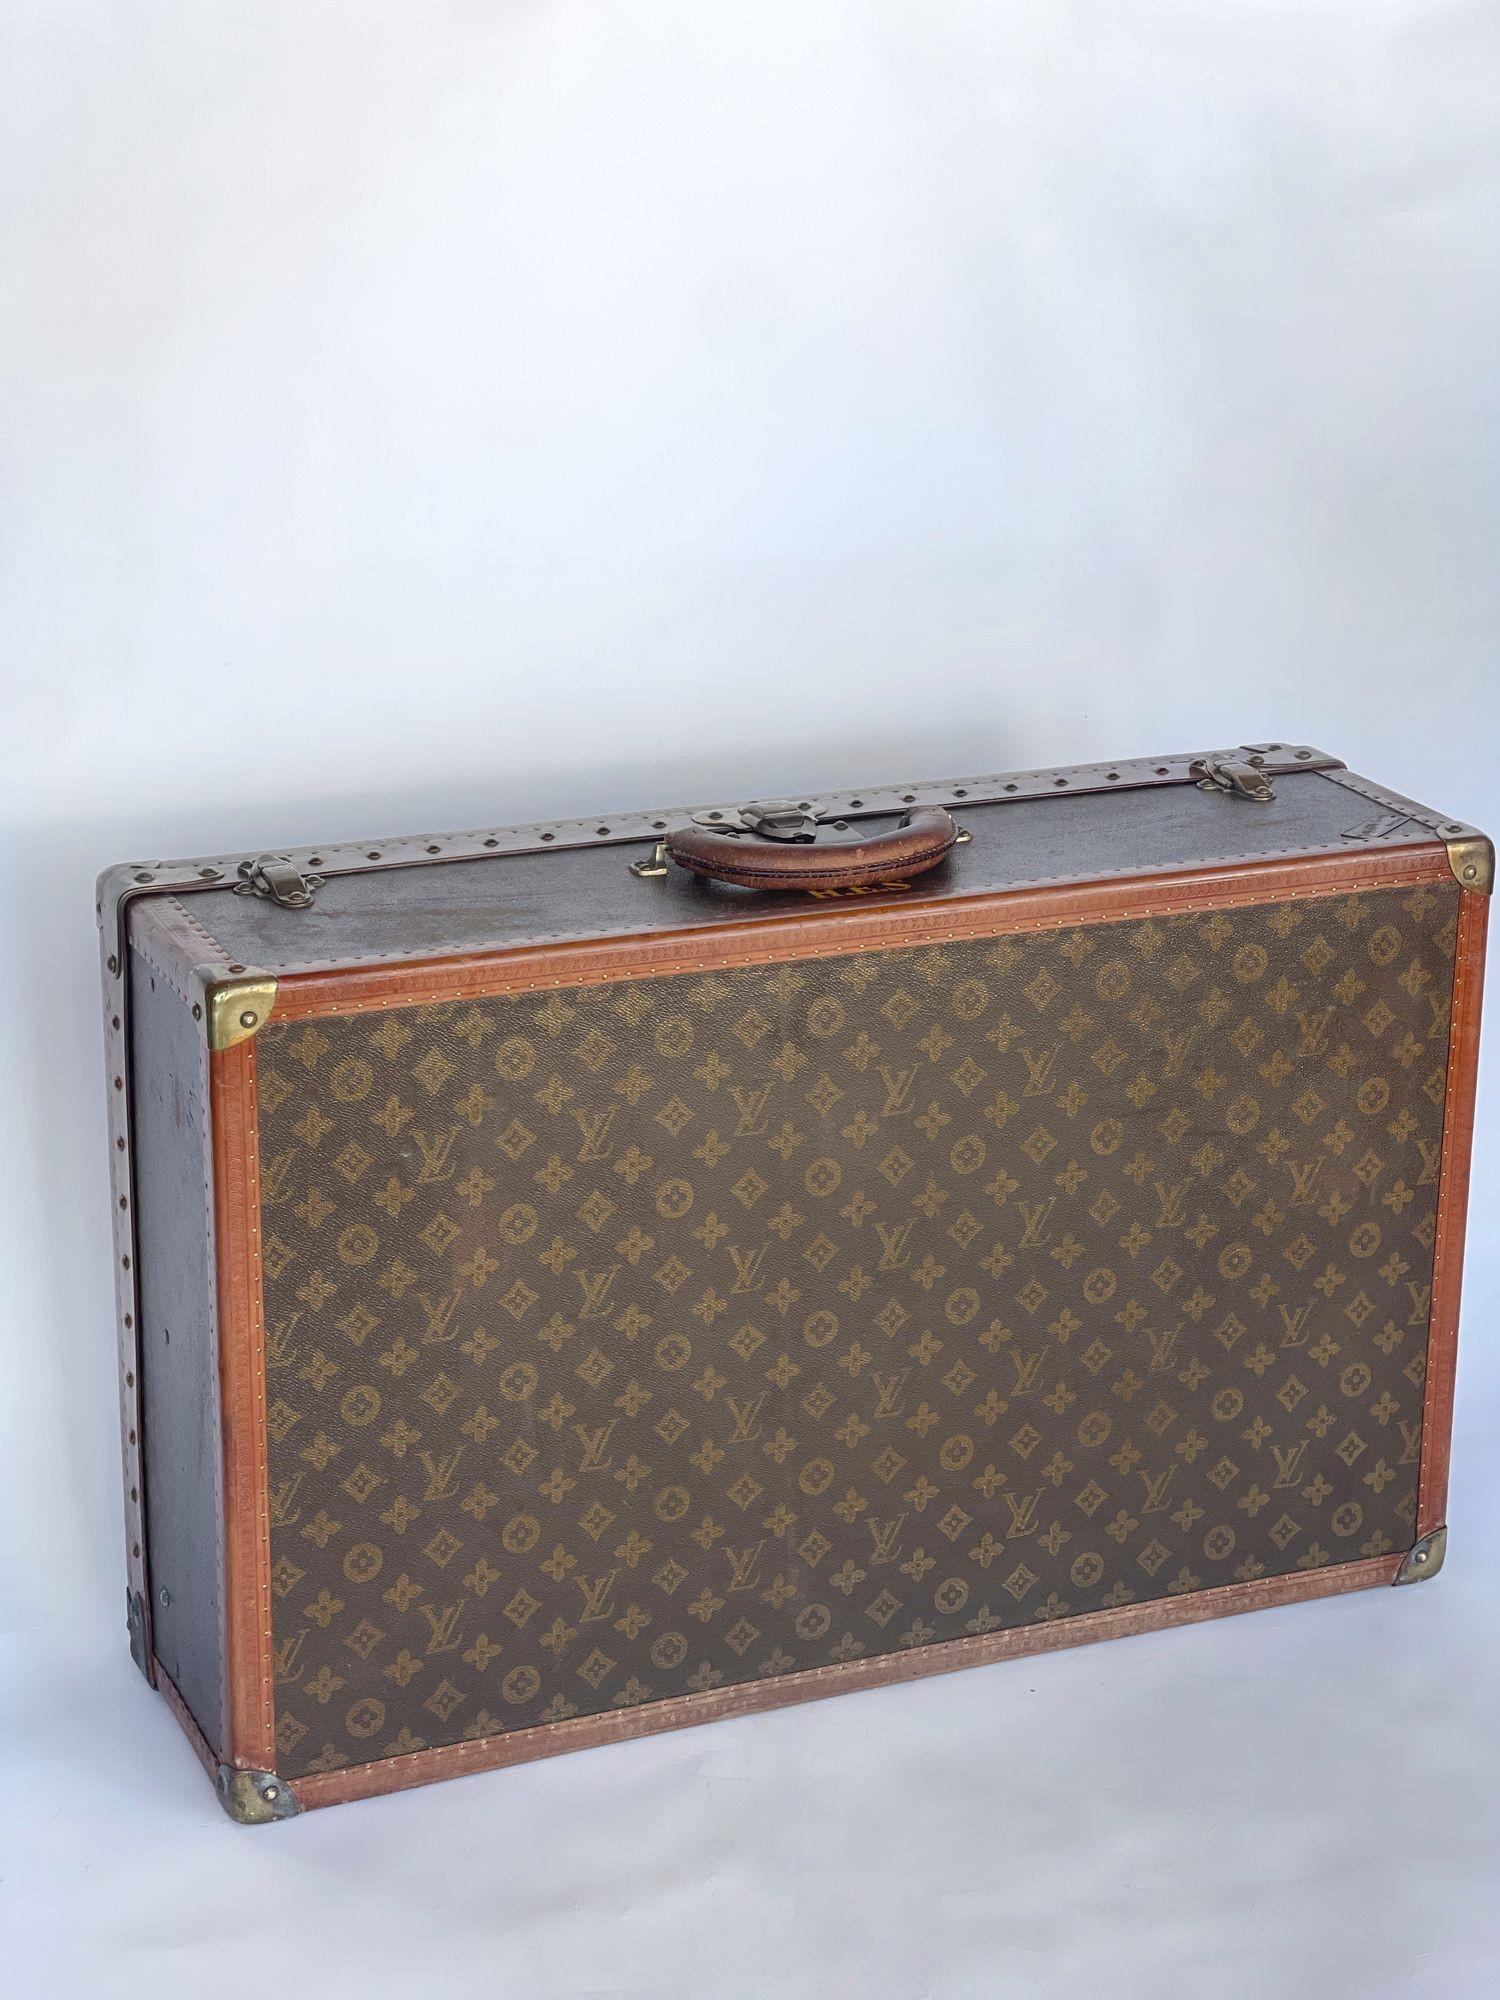 Serial R05966, monogrammed LV canvas having gold toned brass hardware, lock, (2) trunk latches all having LV monogram, Vachetta leather handle and strapping, linen lined interior and removable inner tray, retaining a 'Saks' label inside and outside